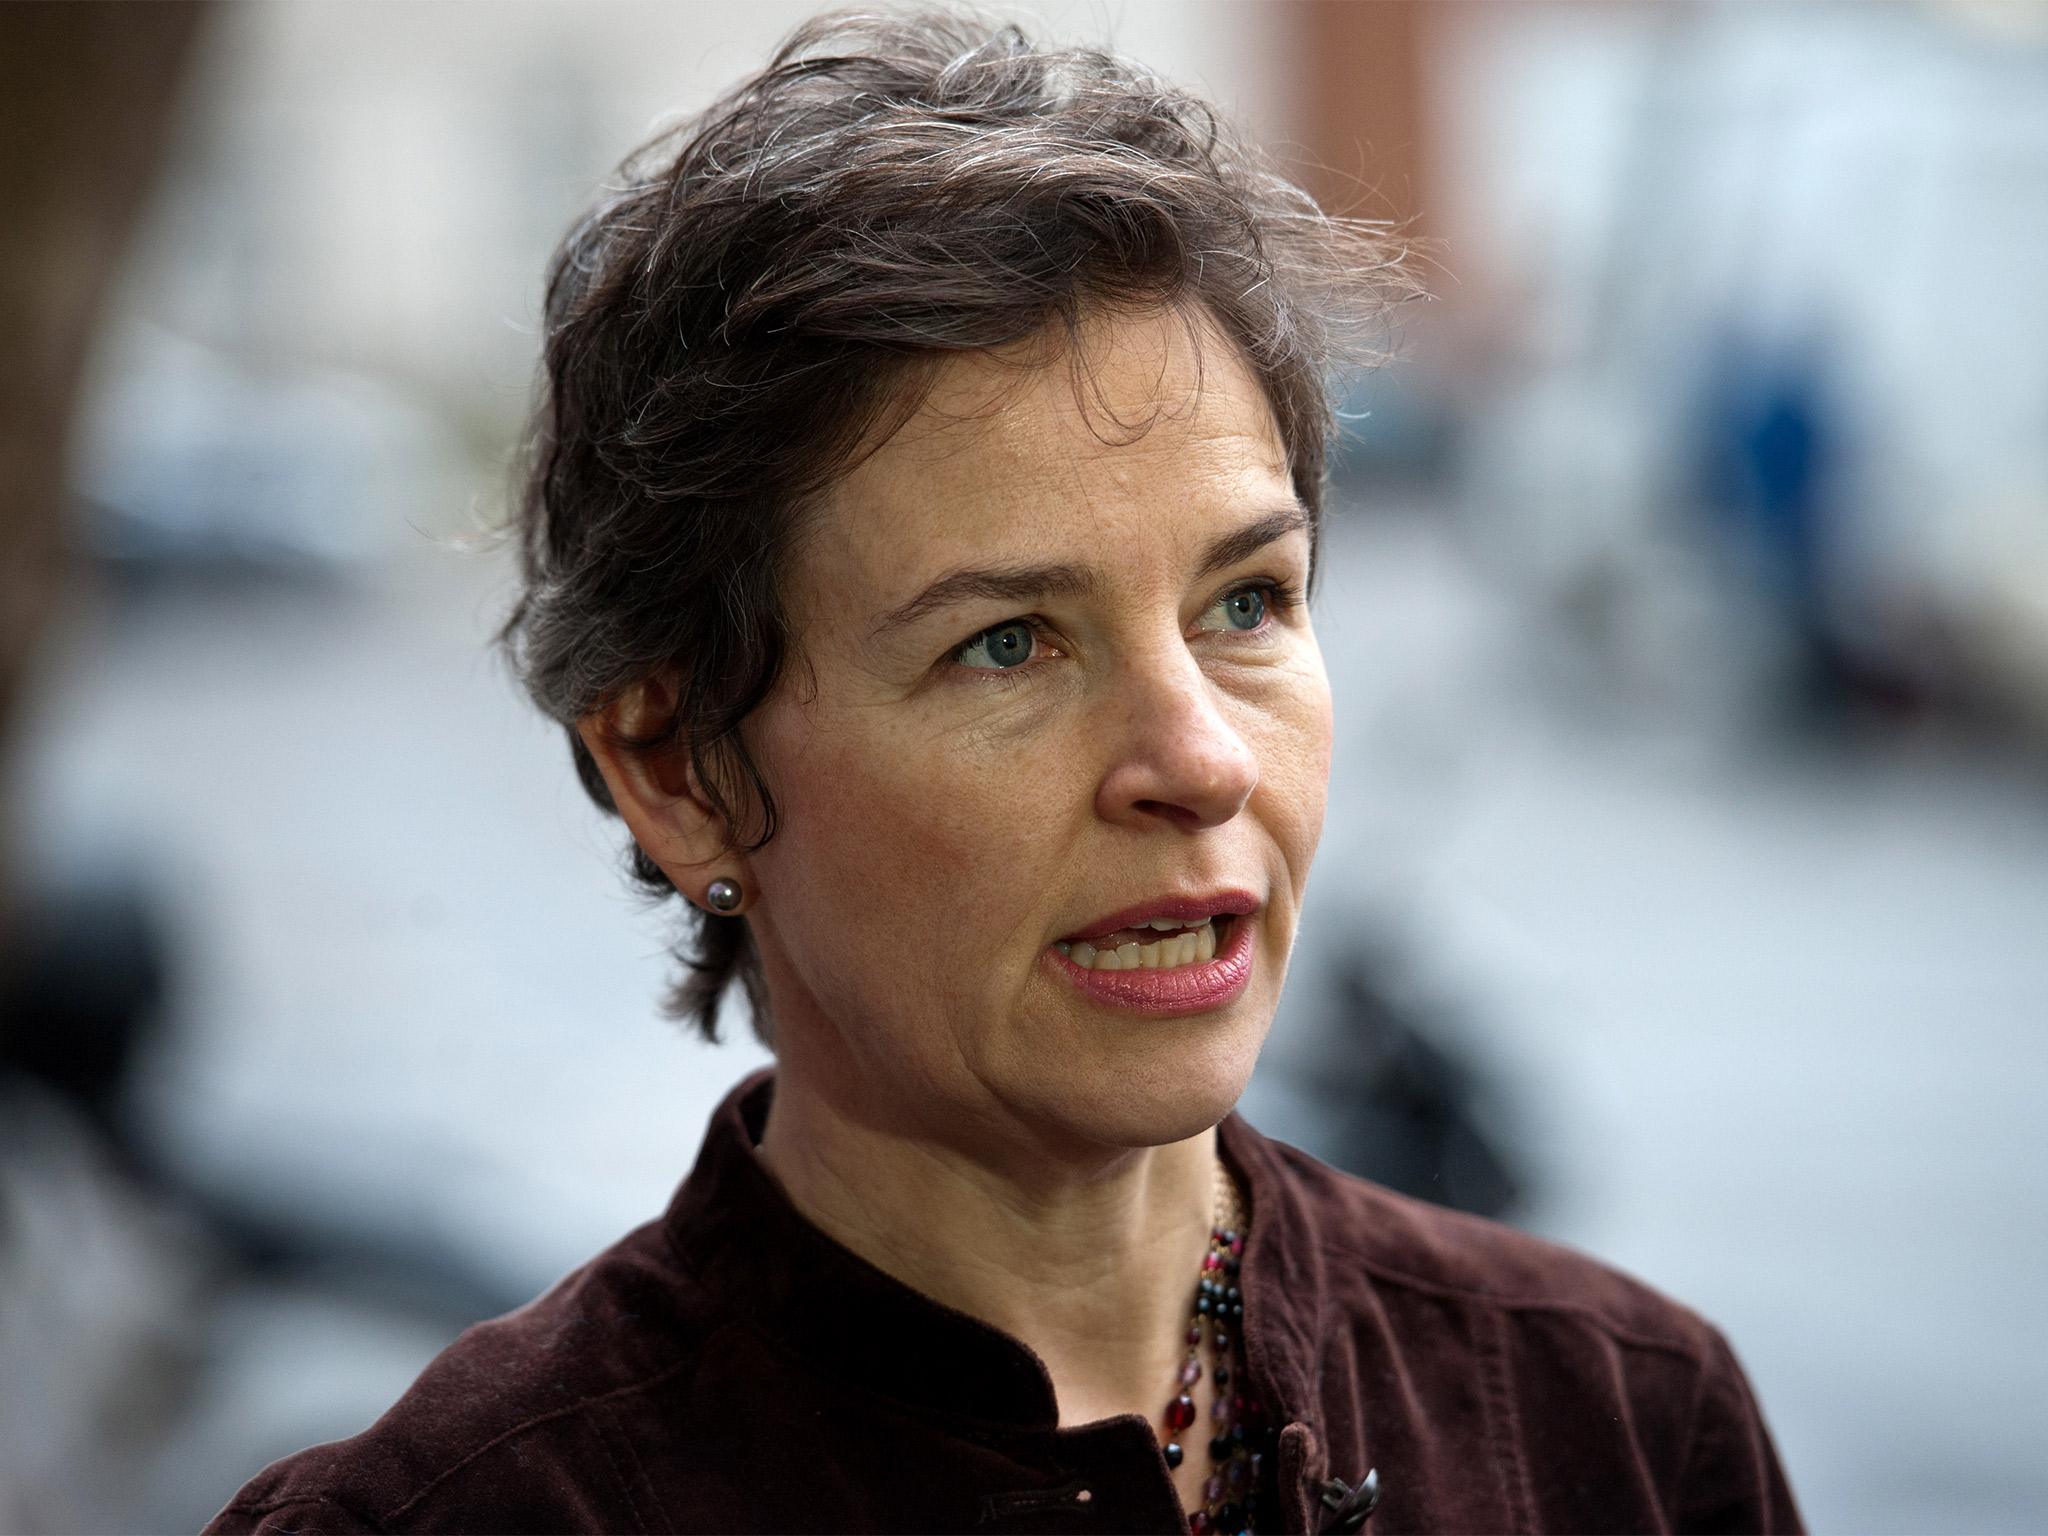 Mary Creagh, shadow International Development Secretary, on foreign aid: 'If you don’t know where it is going then how can you measure if it is working?'